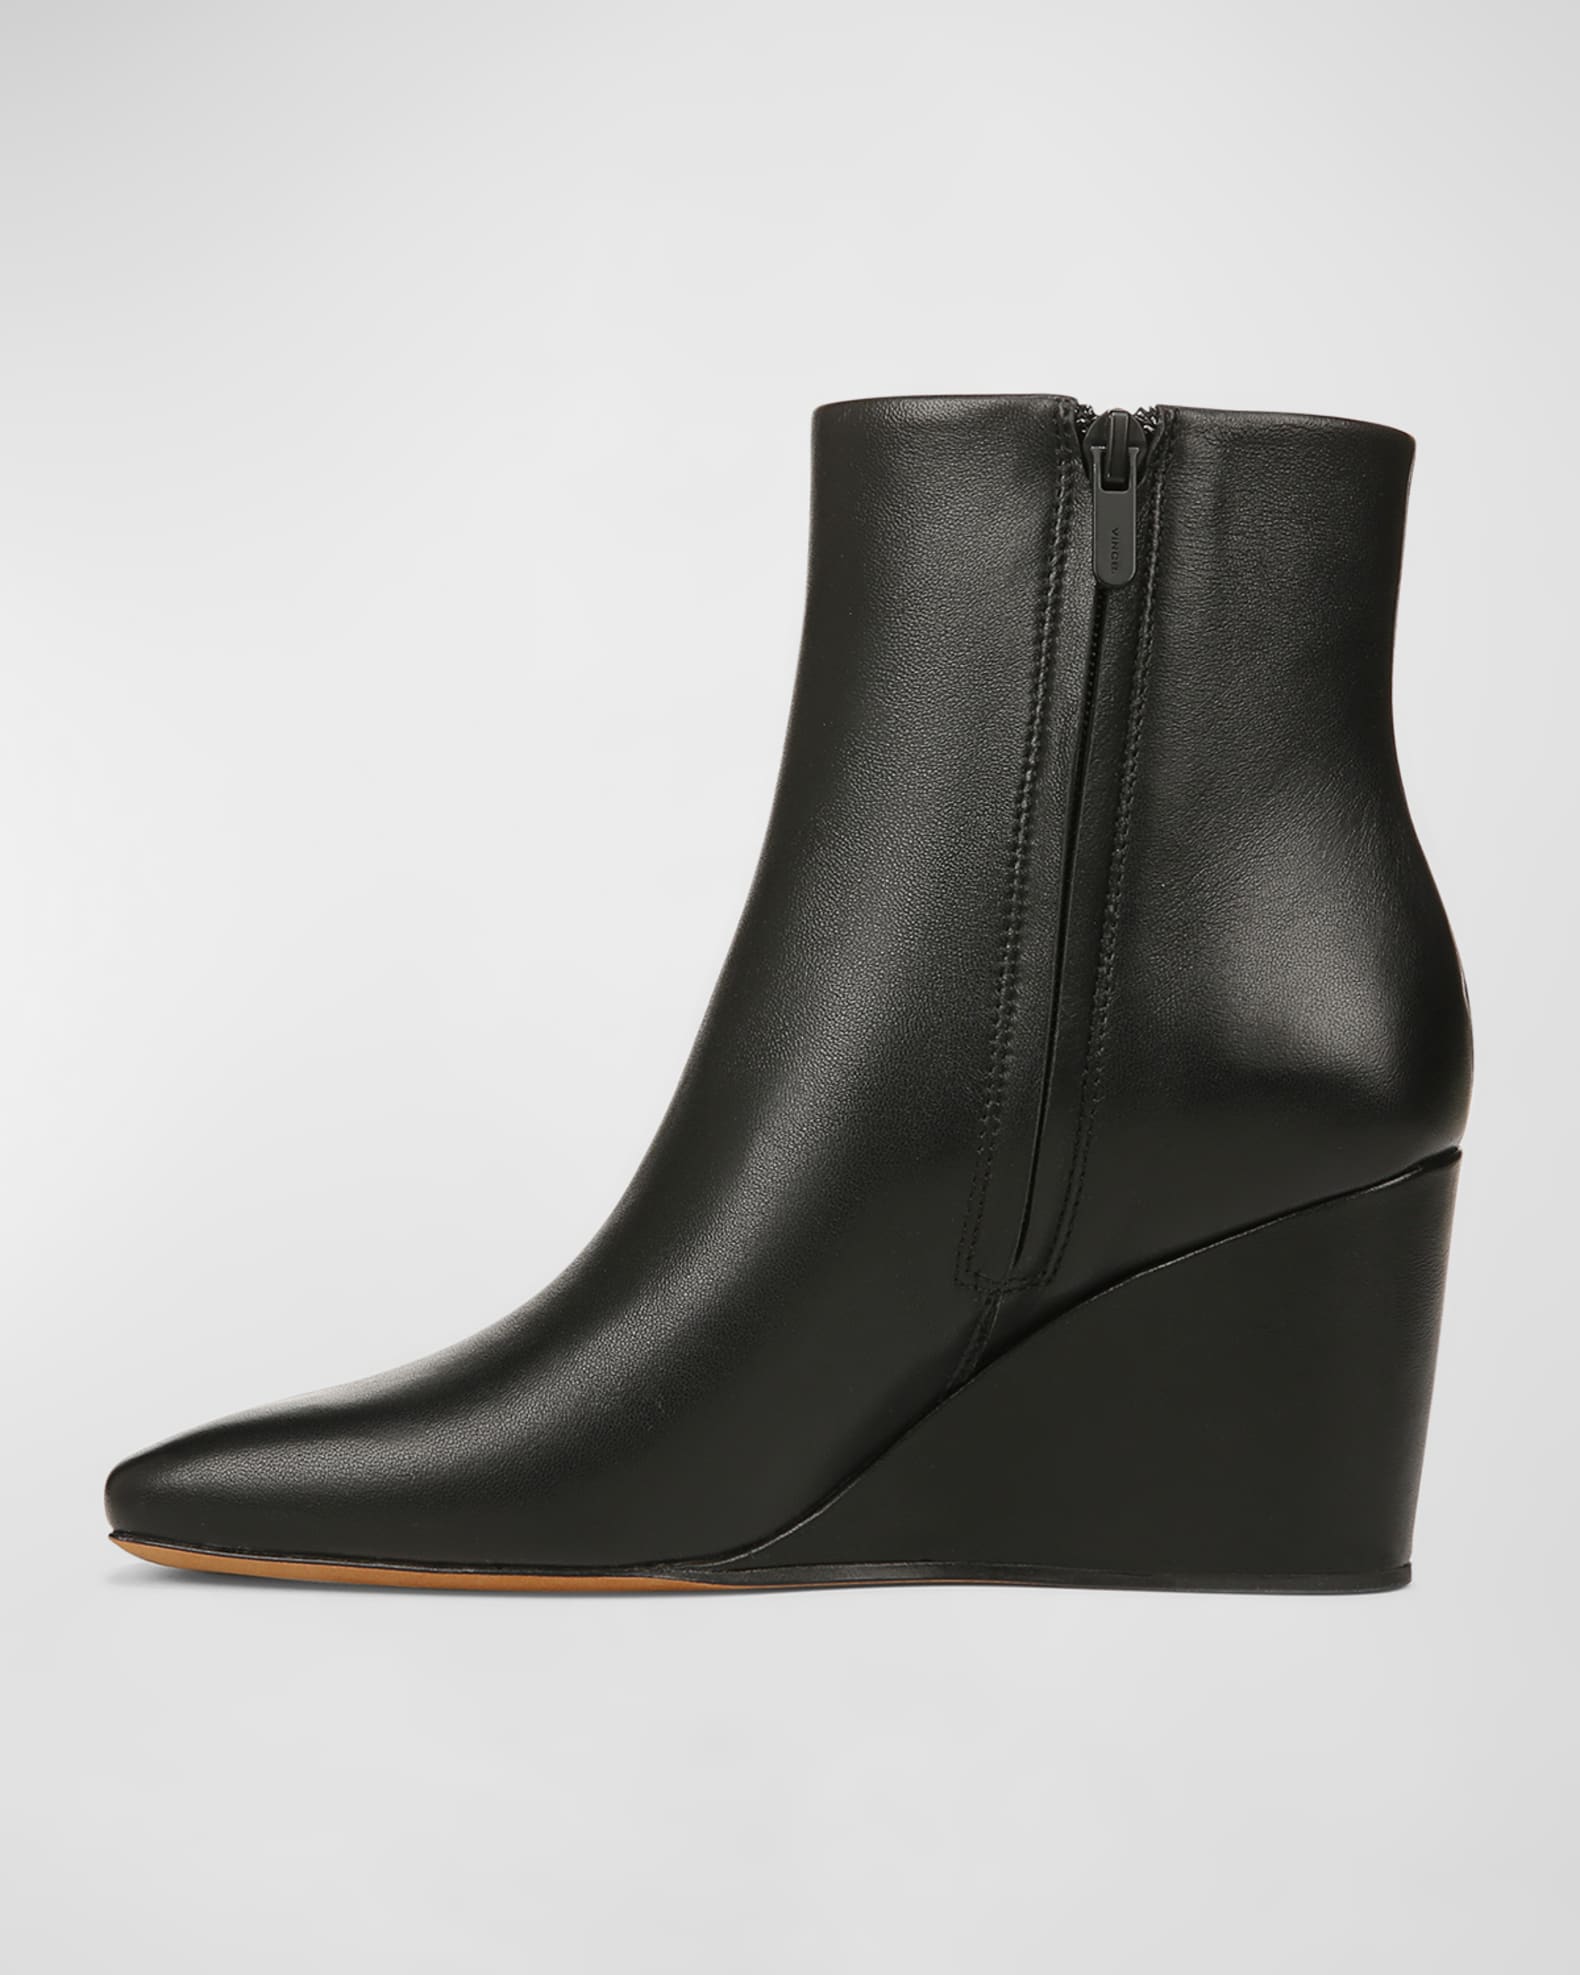 Vince Andy Leather Wedge Ankle Booties | Neiman Marcus